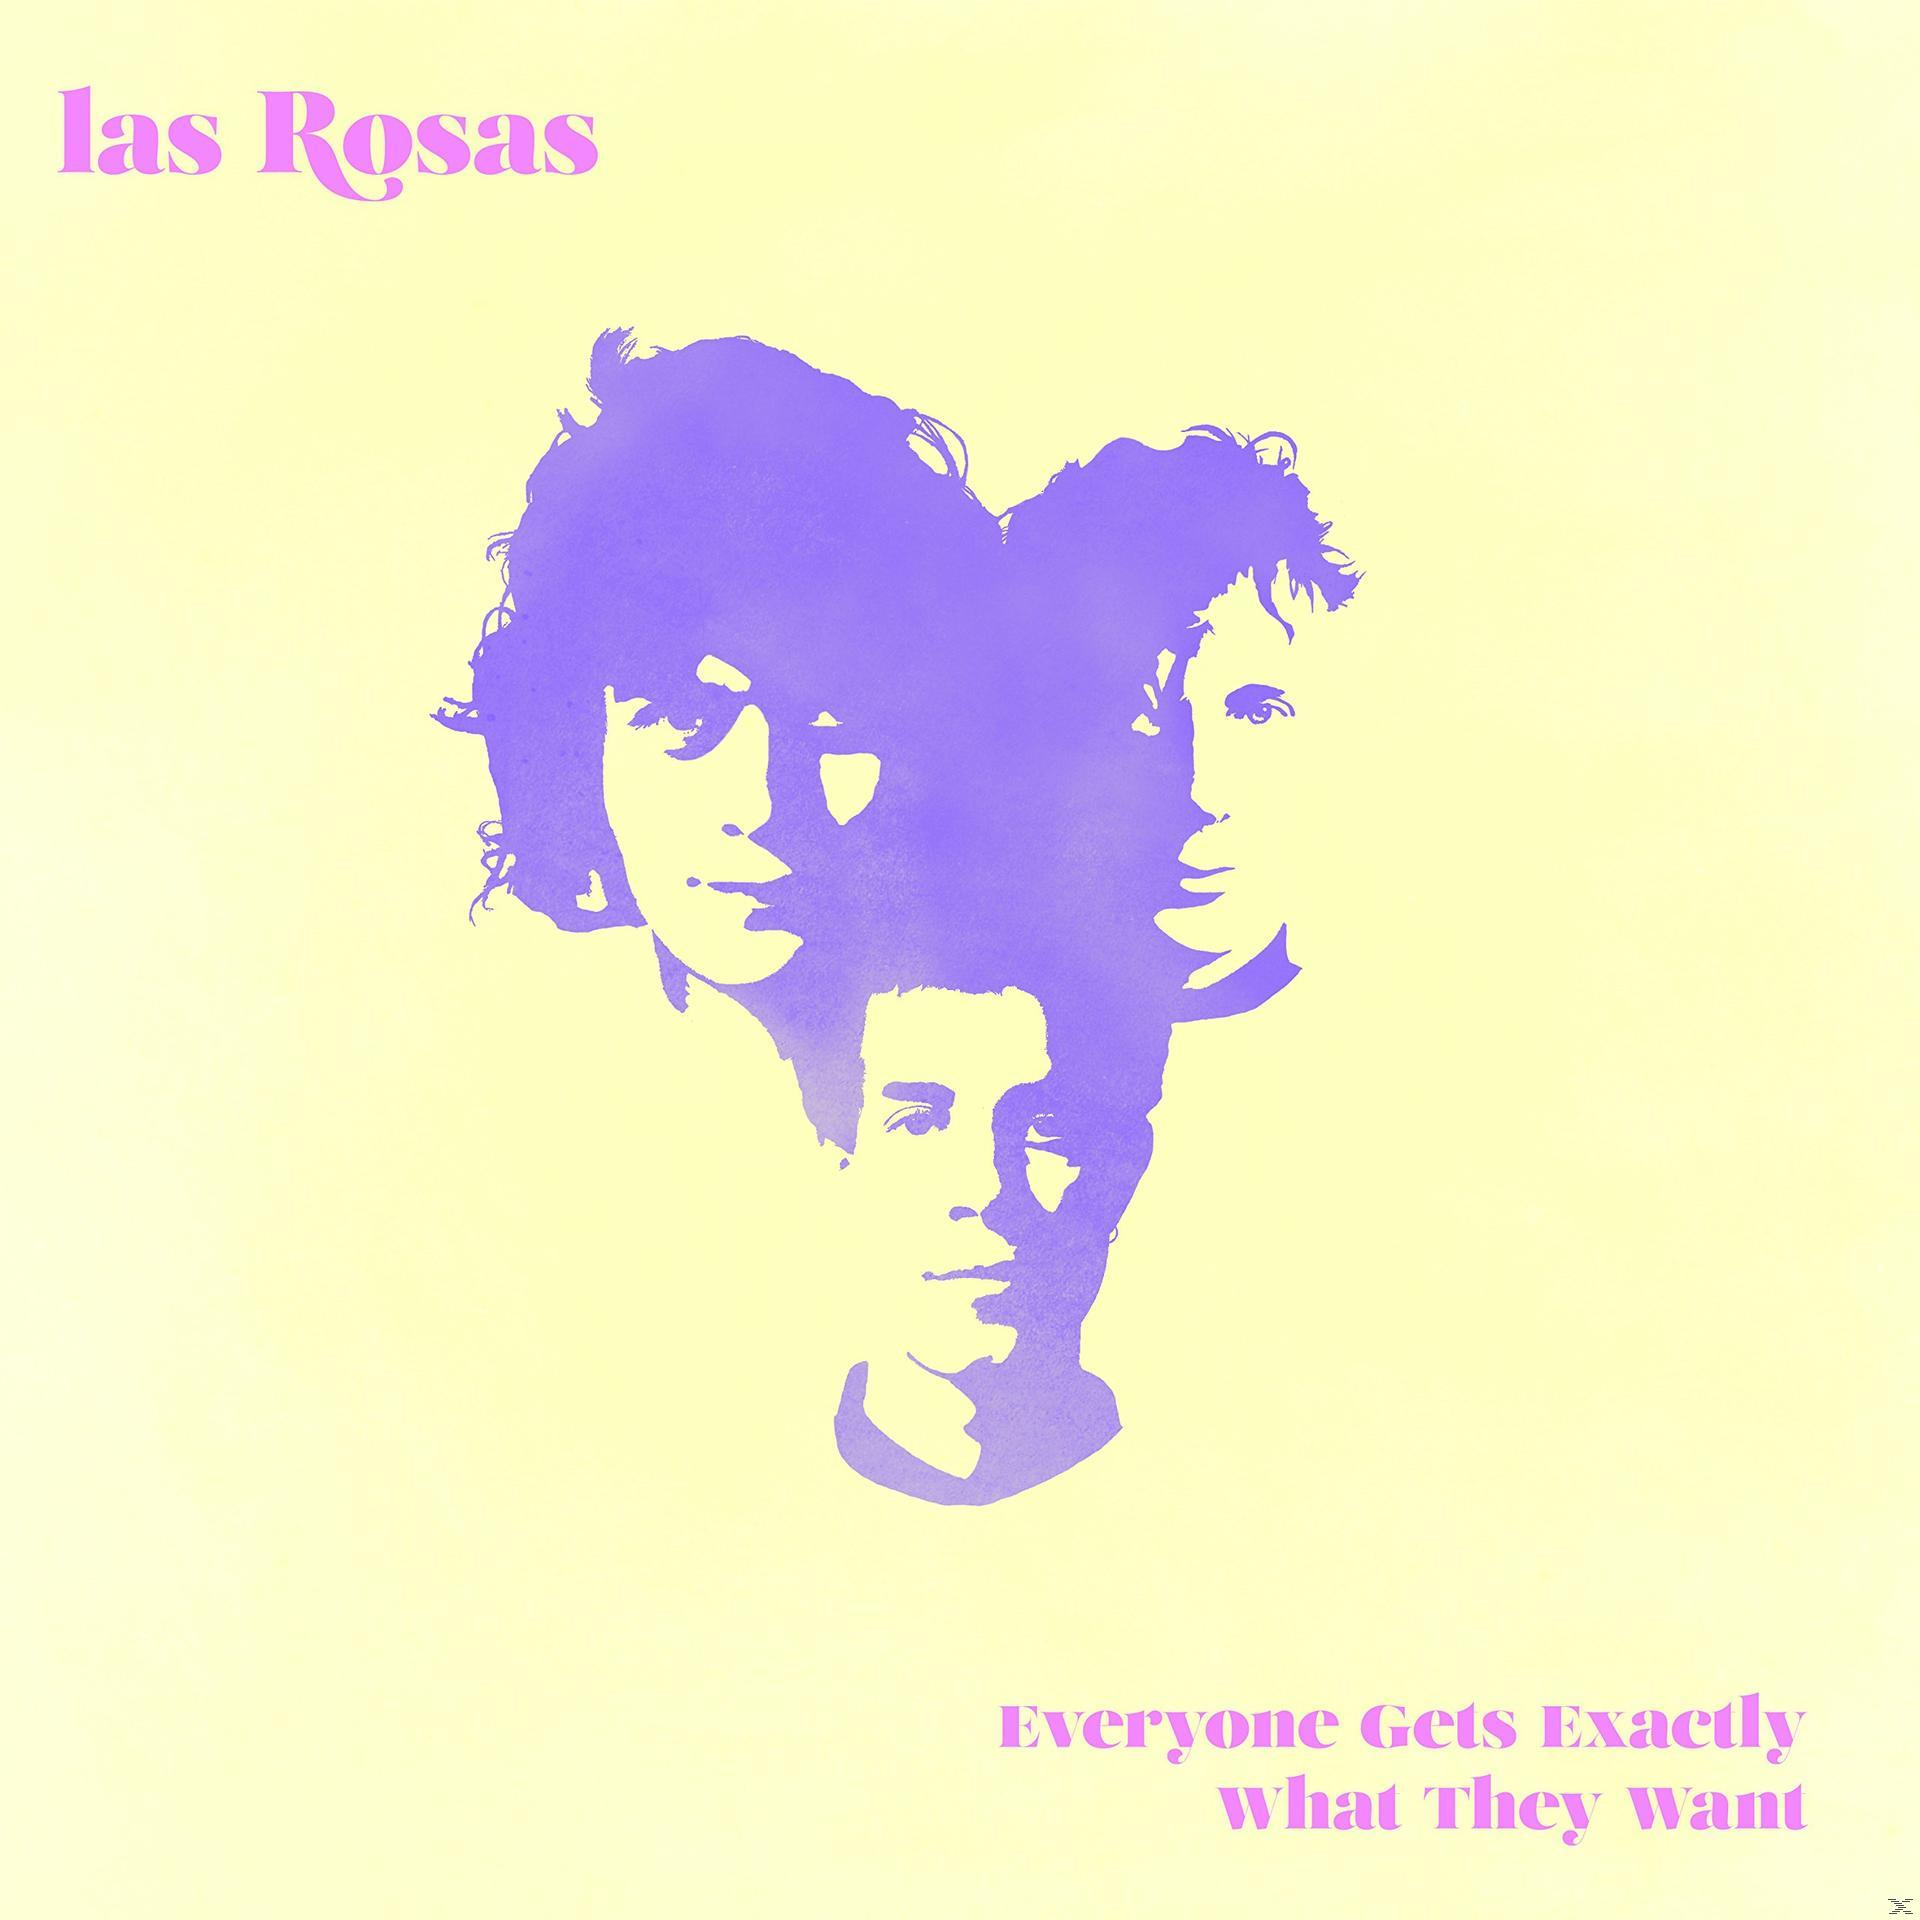 Everyone Exactly Rosas Las Gets They - - What Want (Vinyl)